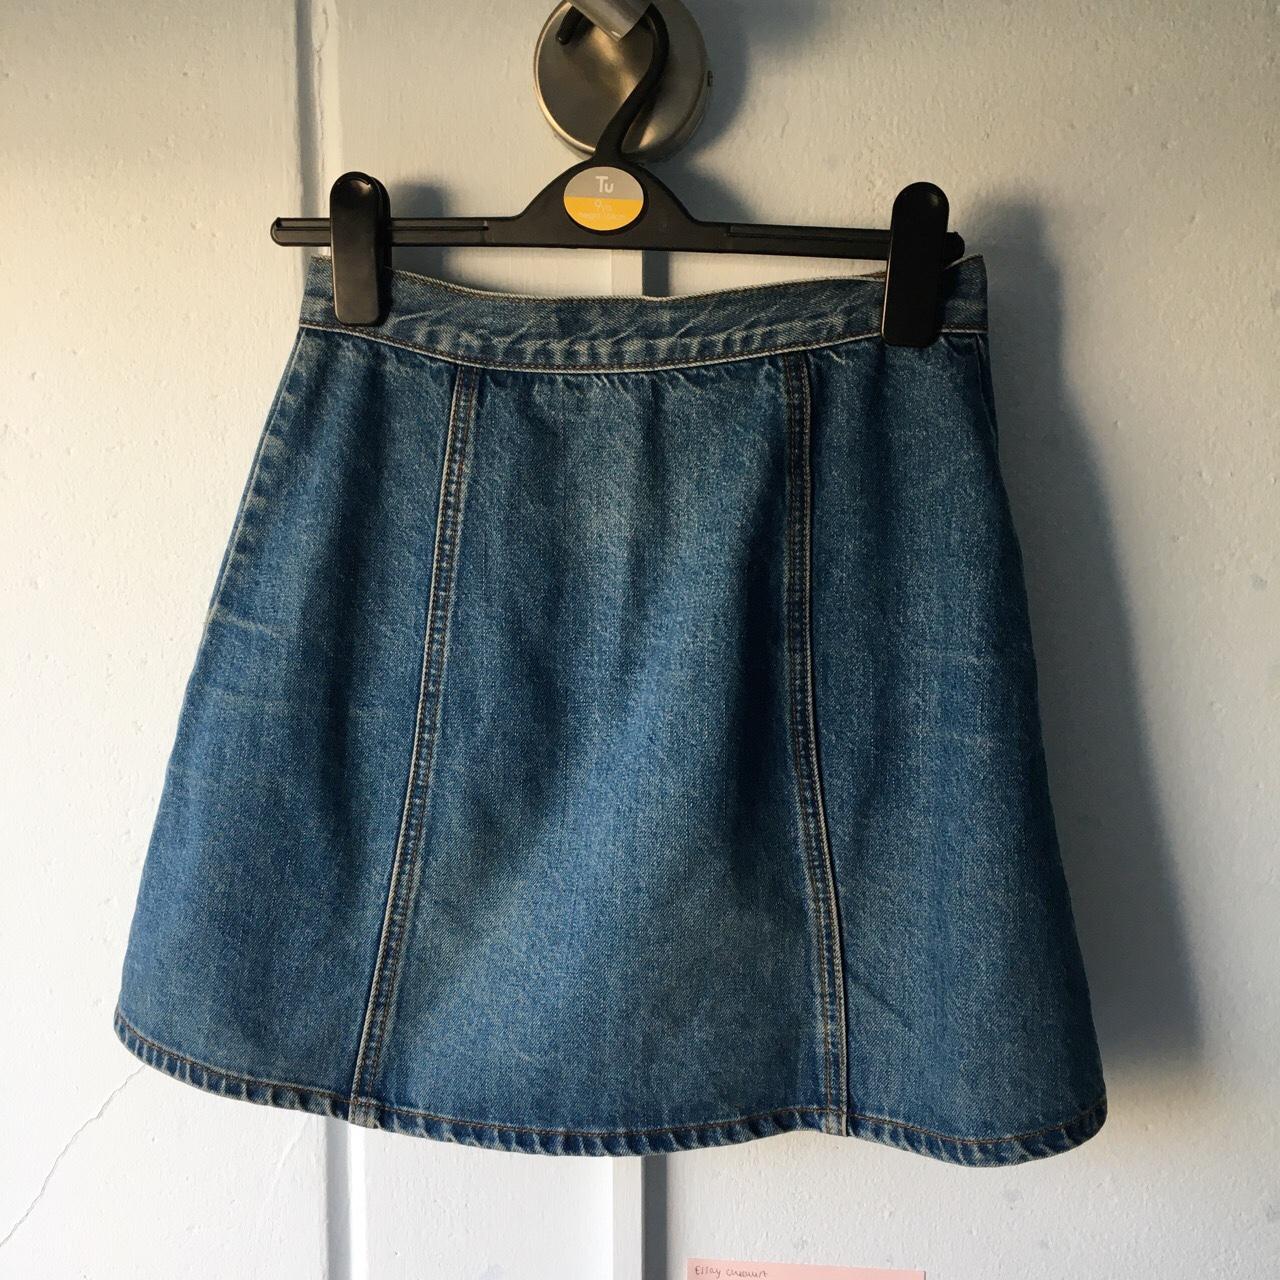 Urban Outfitters Women's Blue and Navy Skirt | Depop